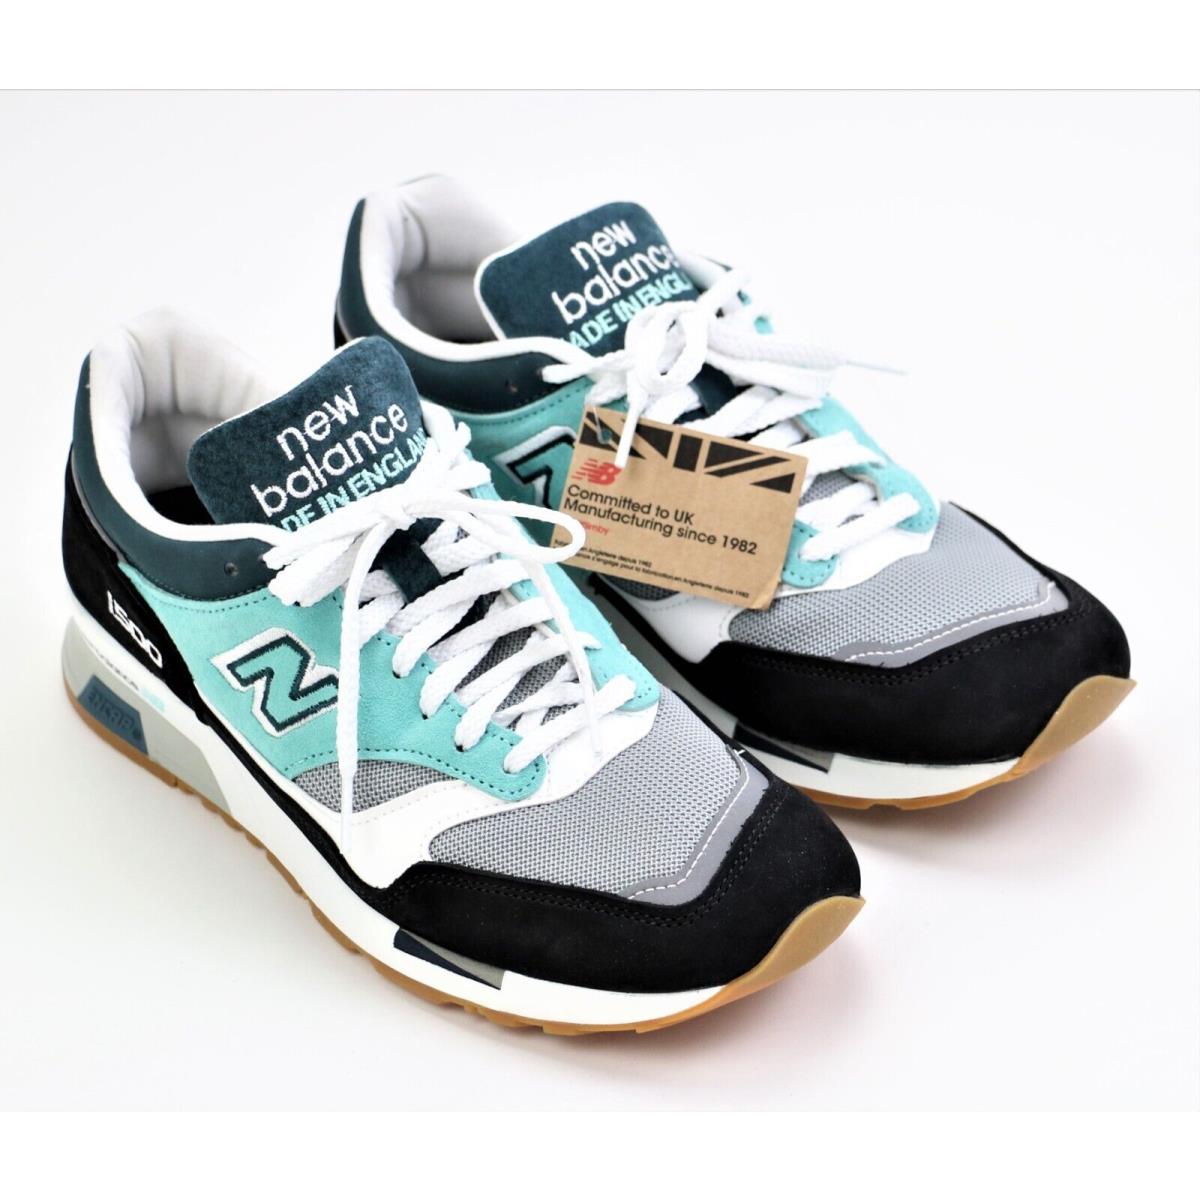 New Balance 1500 Men`s Shoes Size 9.5 Made IN England Black Teal UK M1500LIB